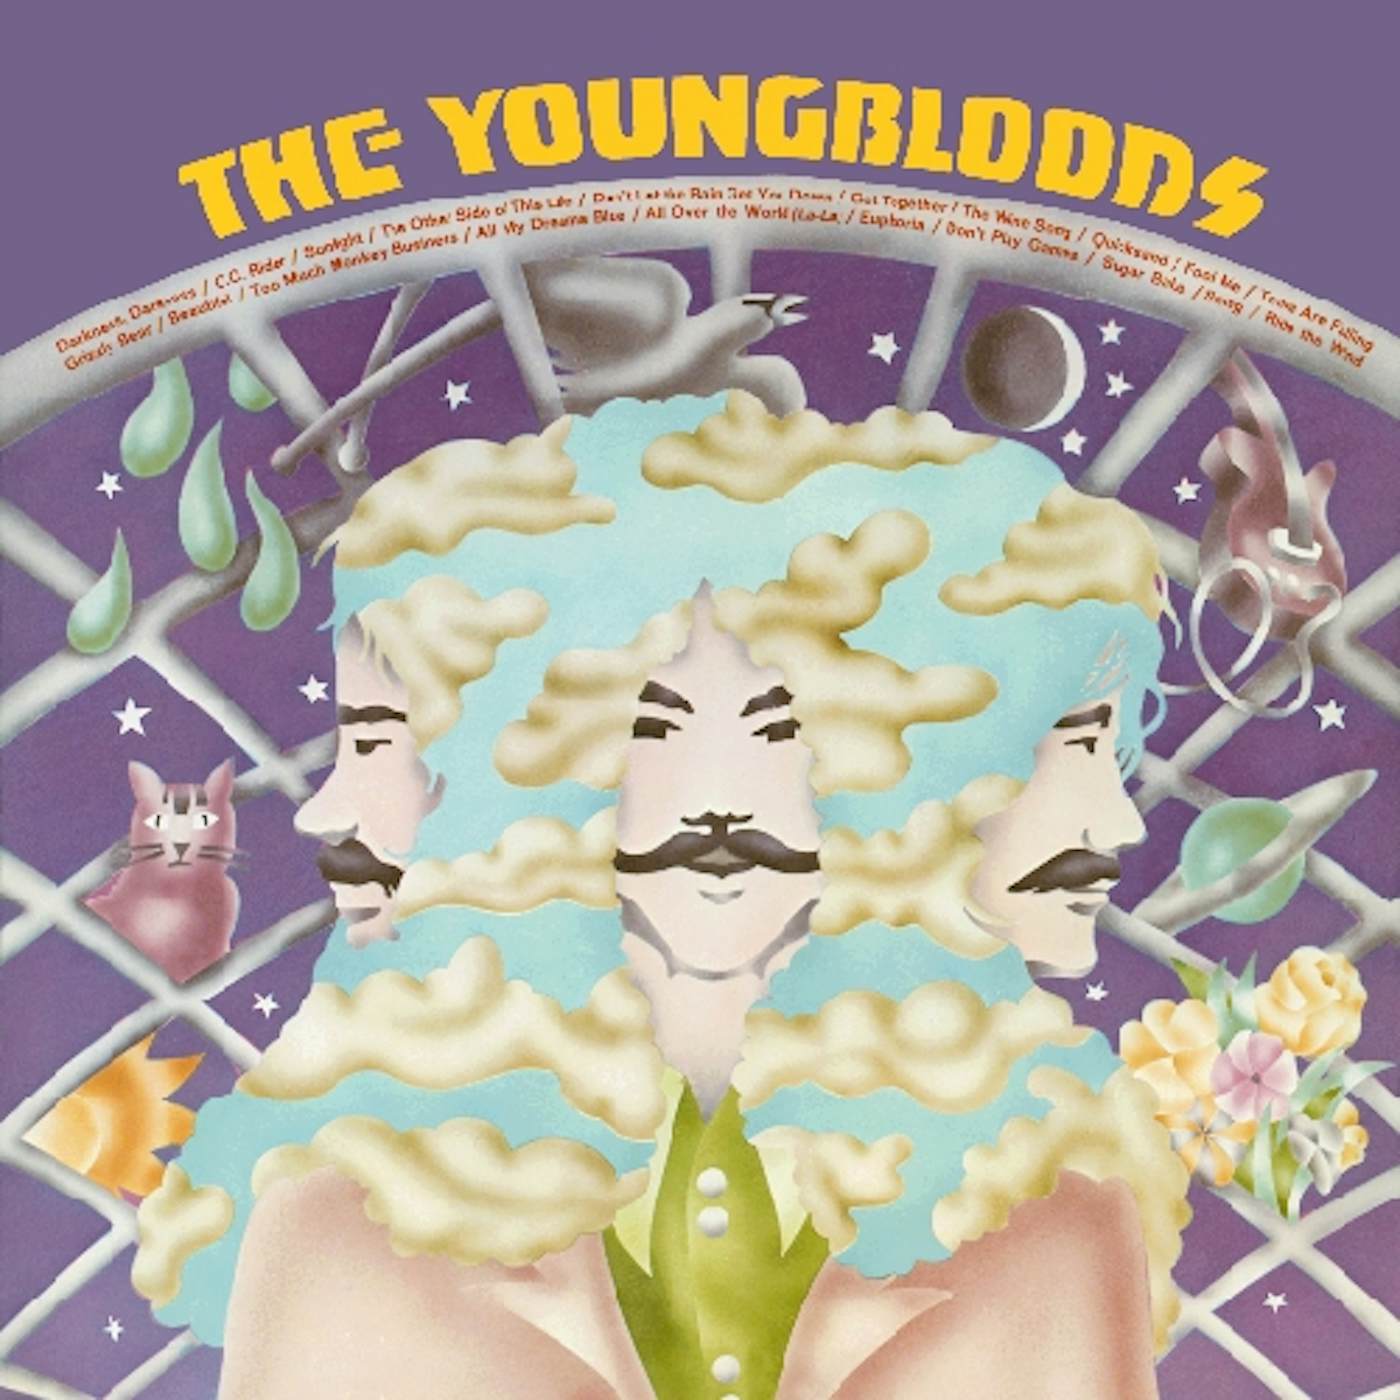 THIS IS THE YOUNGBLOODS CD